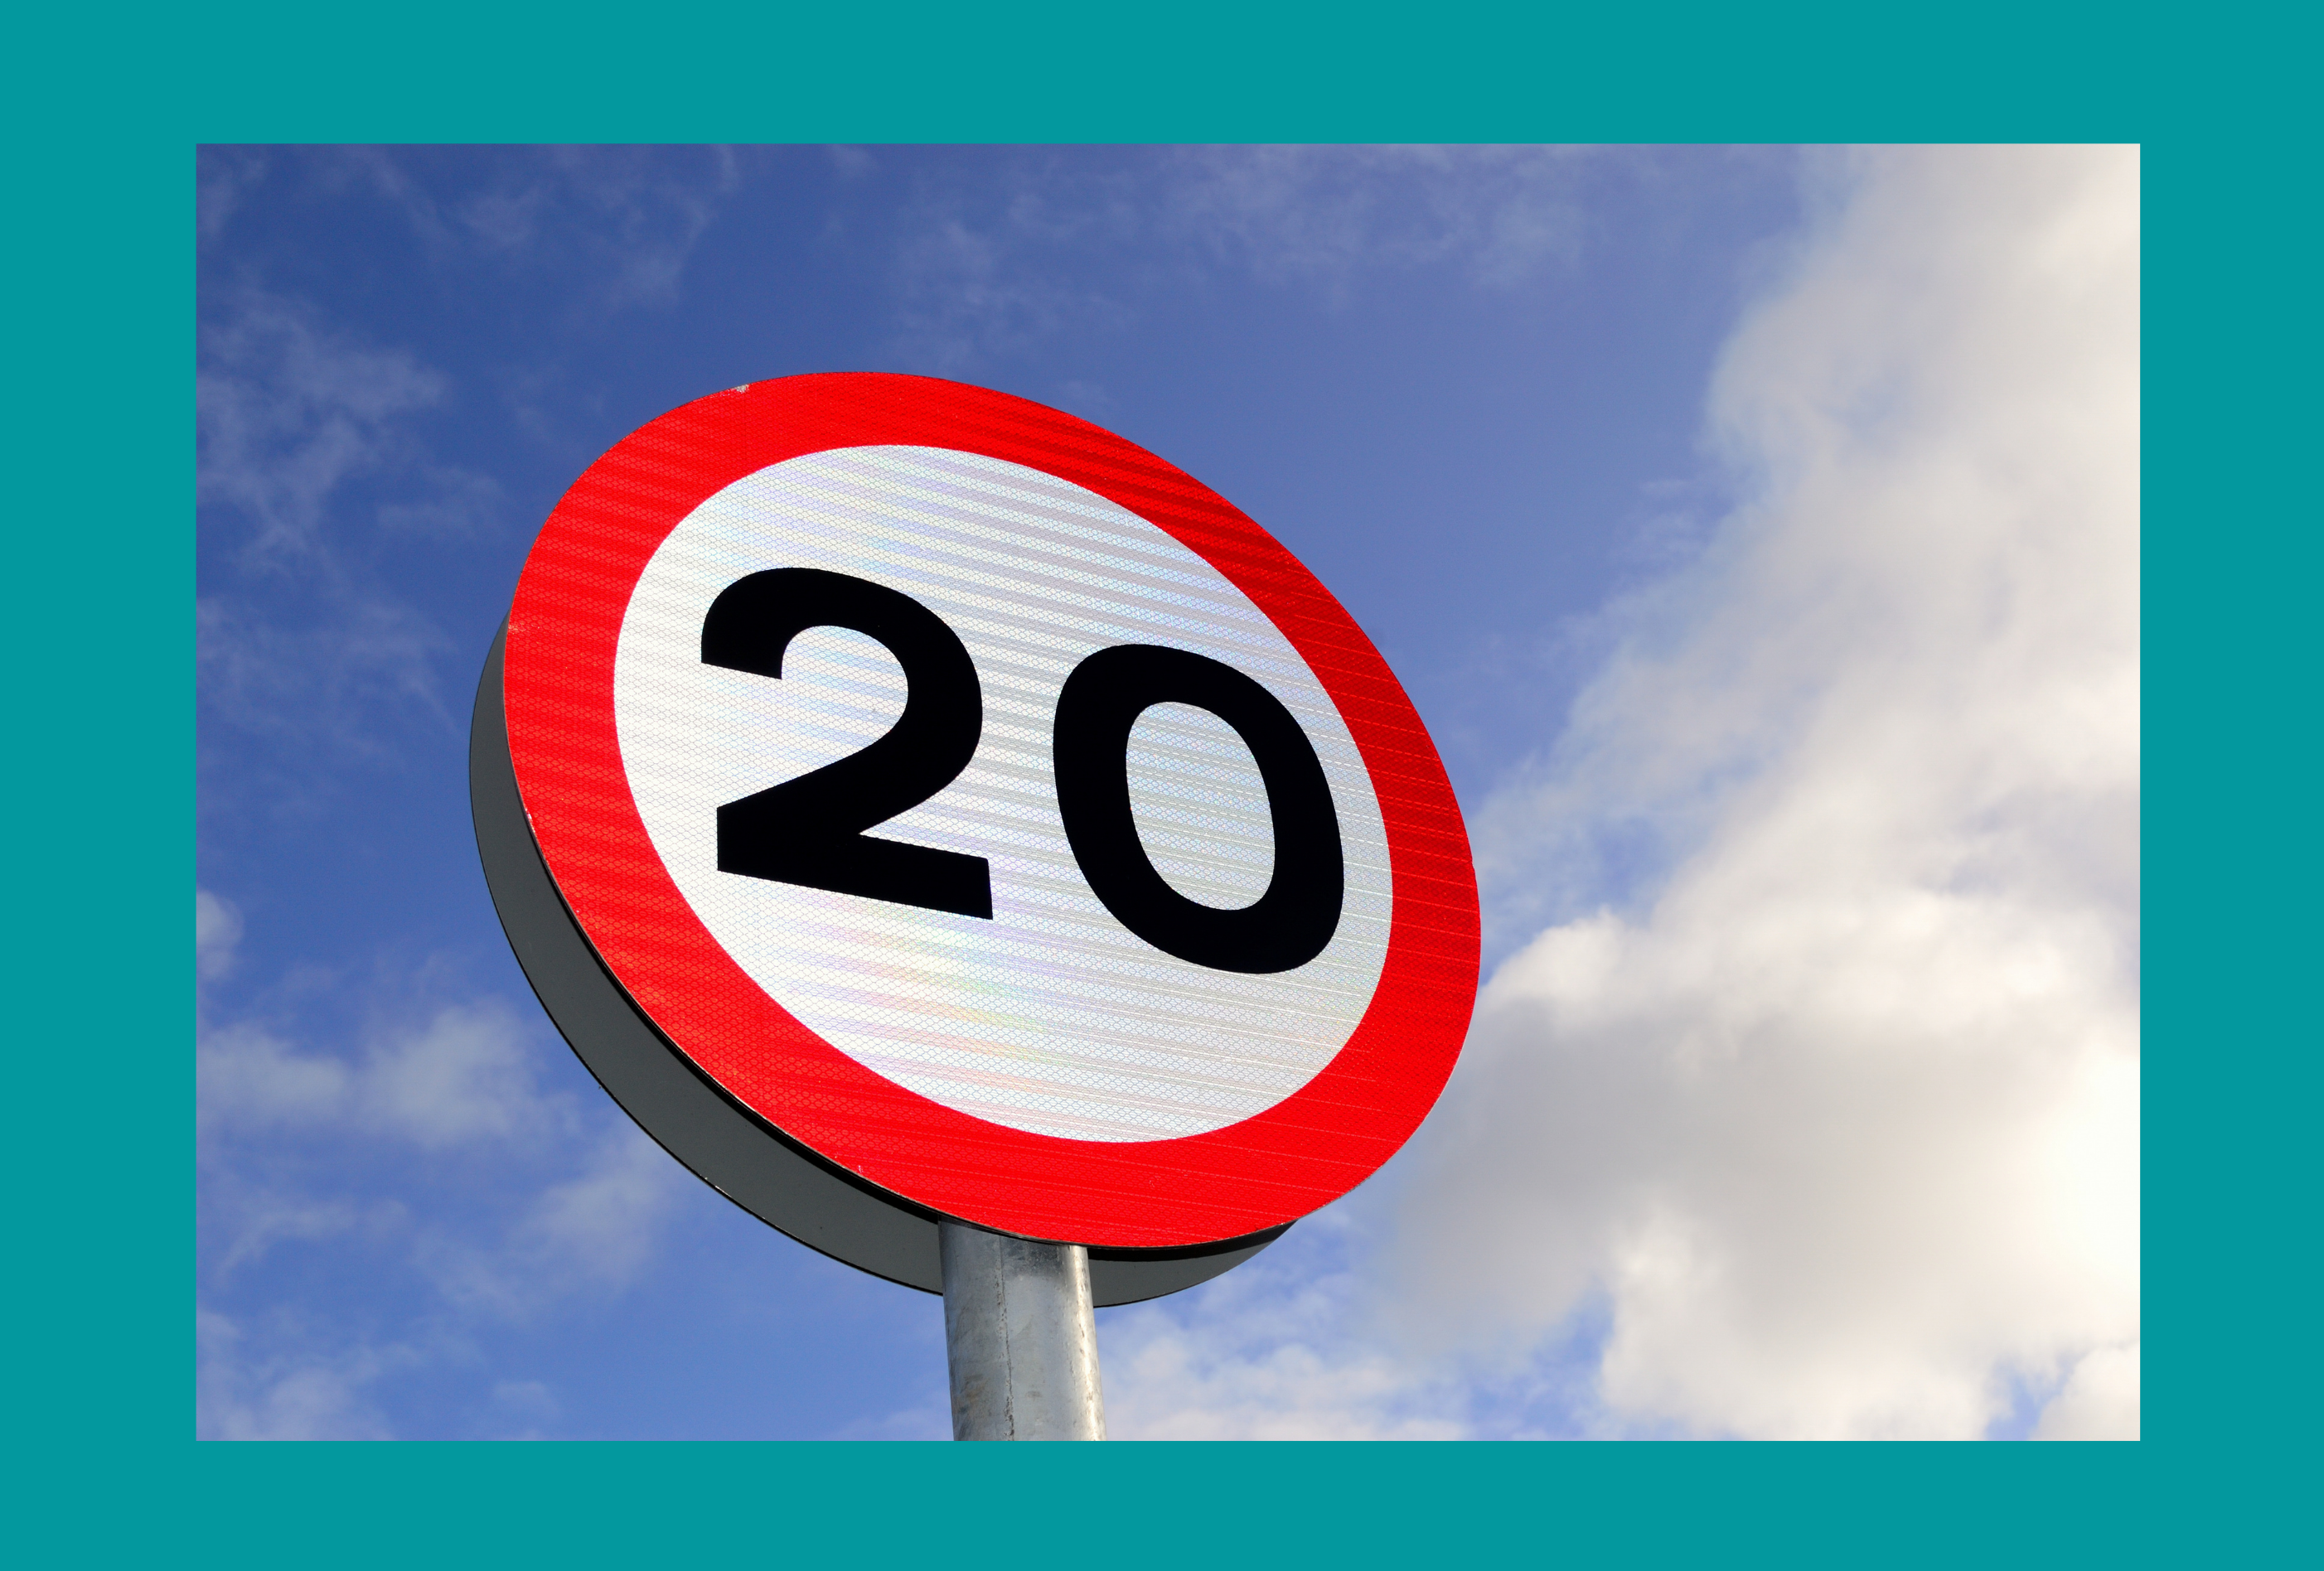 NEWS | 20mph speed limit set to be rolled out in Abergavenny as part of trial – Should Hereford do the same?